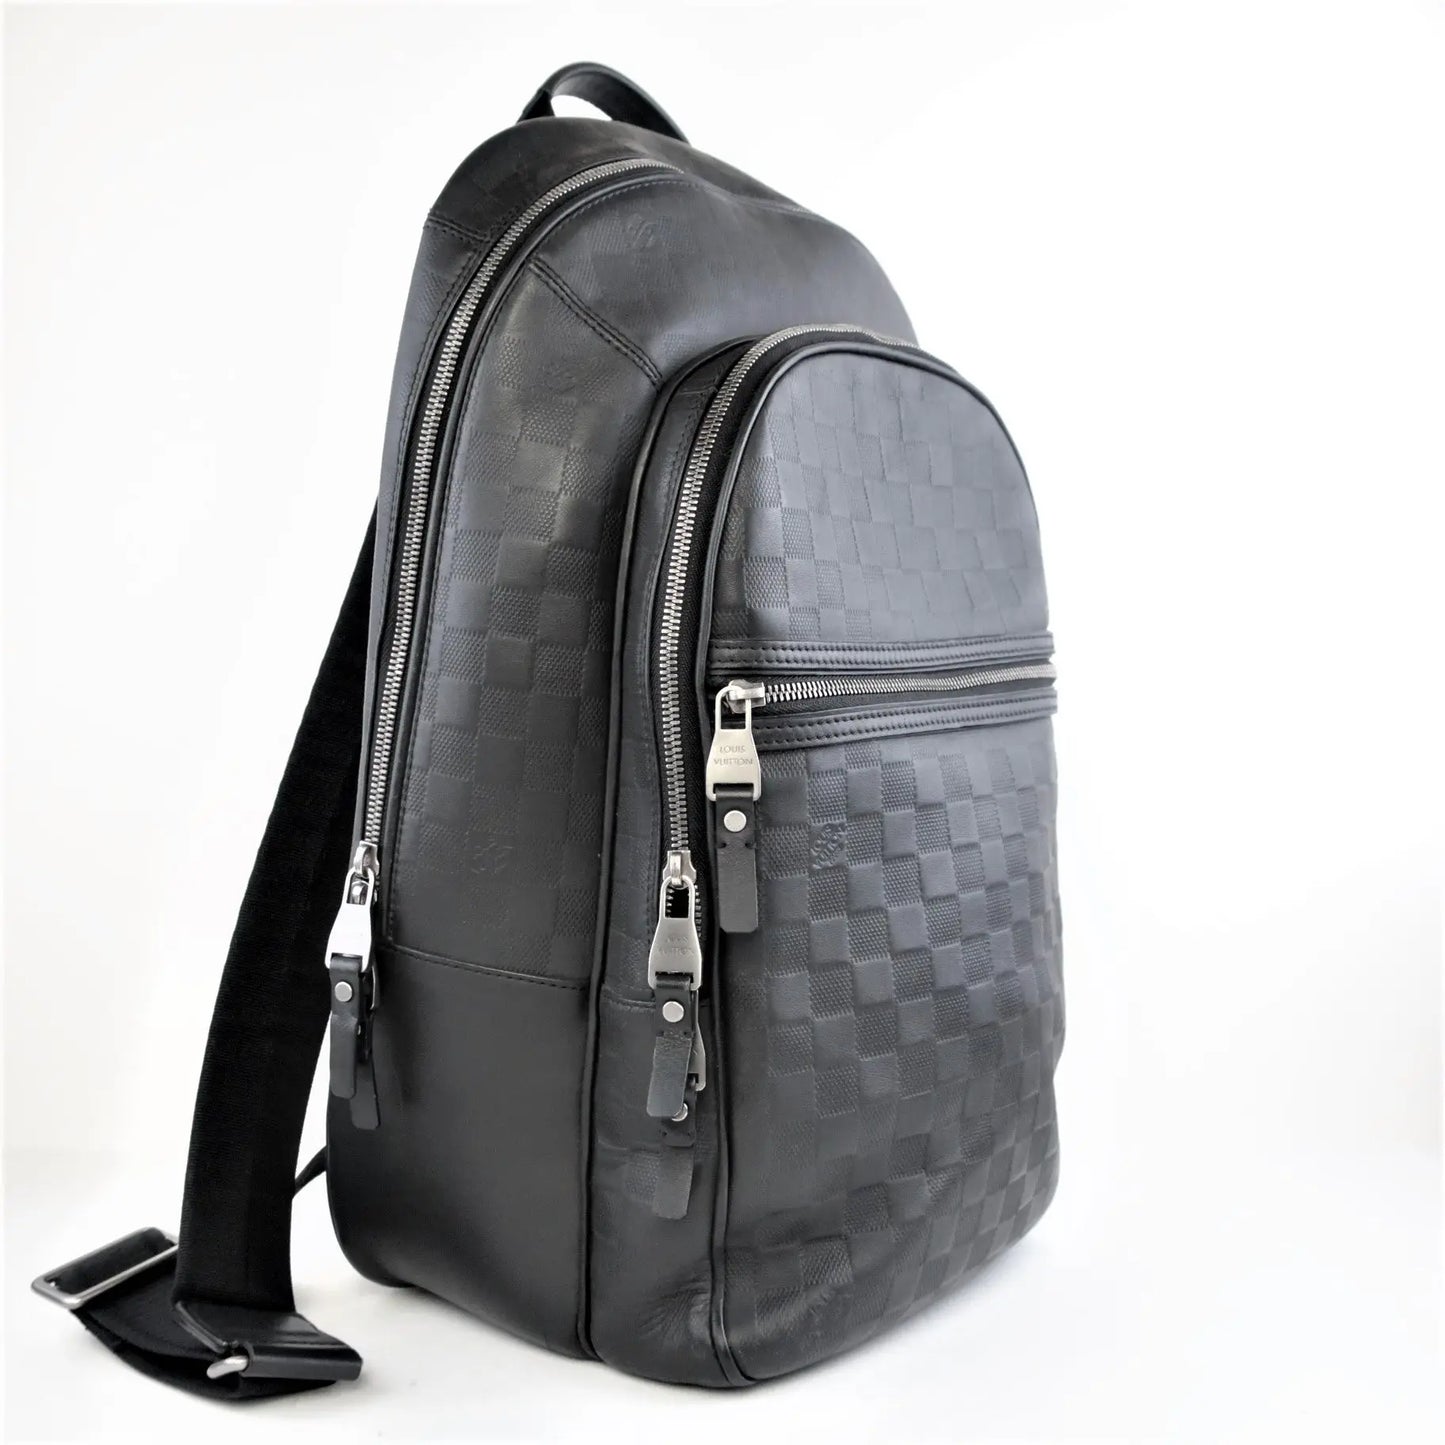 Louis Vuitton lv Michael backpack Damier infini leather